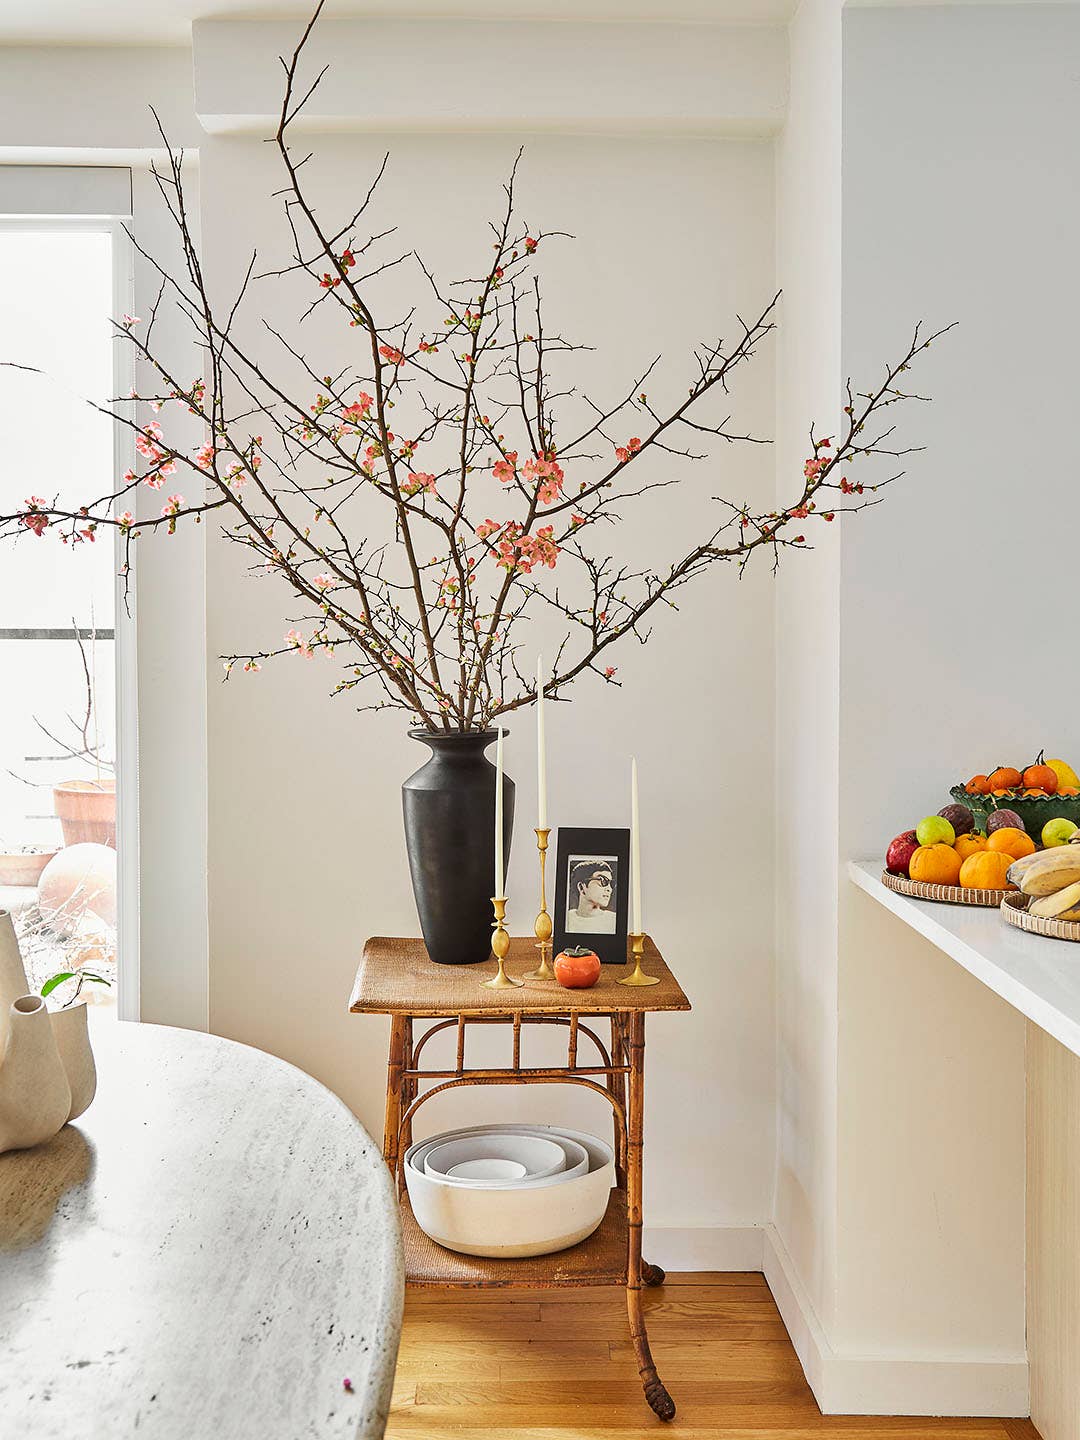 Nailing a Dramatic Branch Arrangement Is All in the Vase